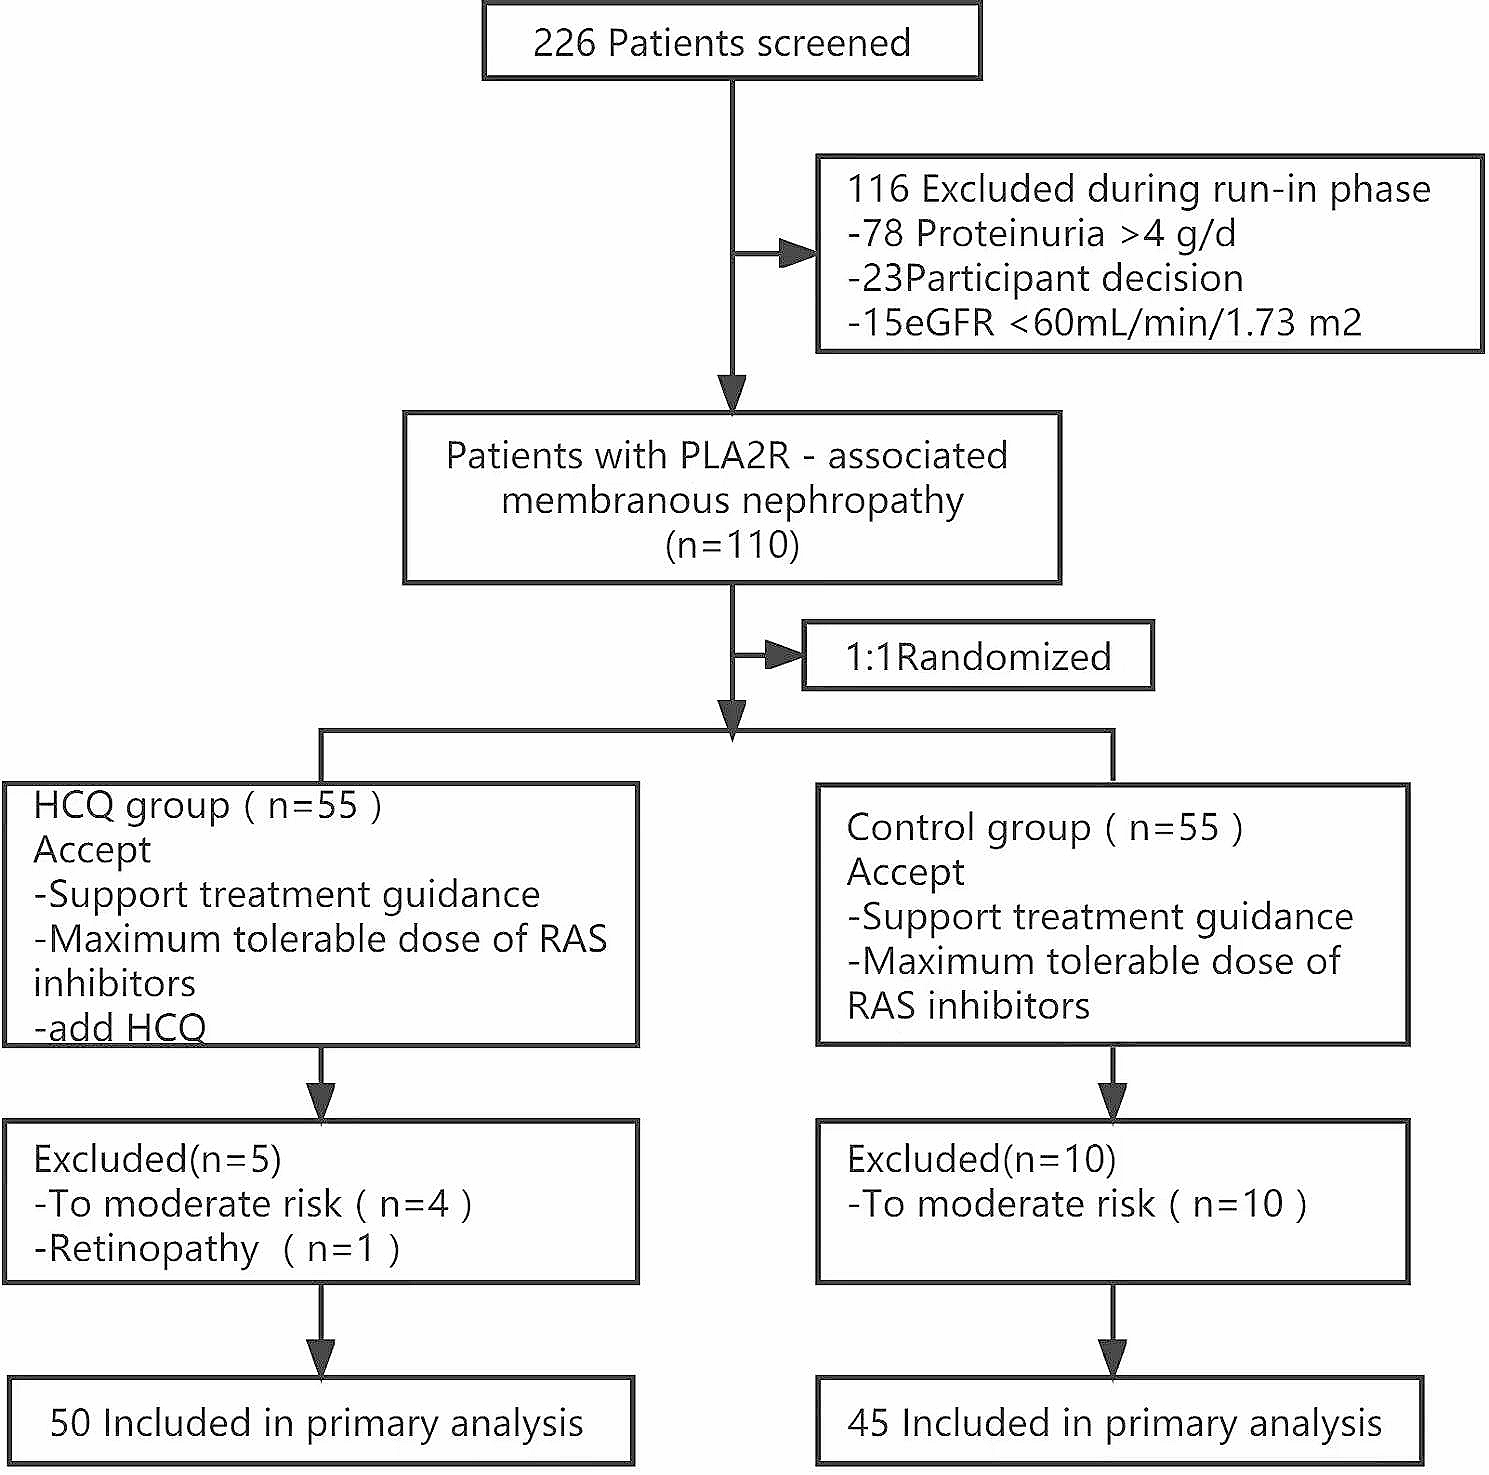 A single-center, open label, randomized, controlled study of hydroxychloroquine sulfate in the treatment of low risk PLA2R-associated membranous nephropathy